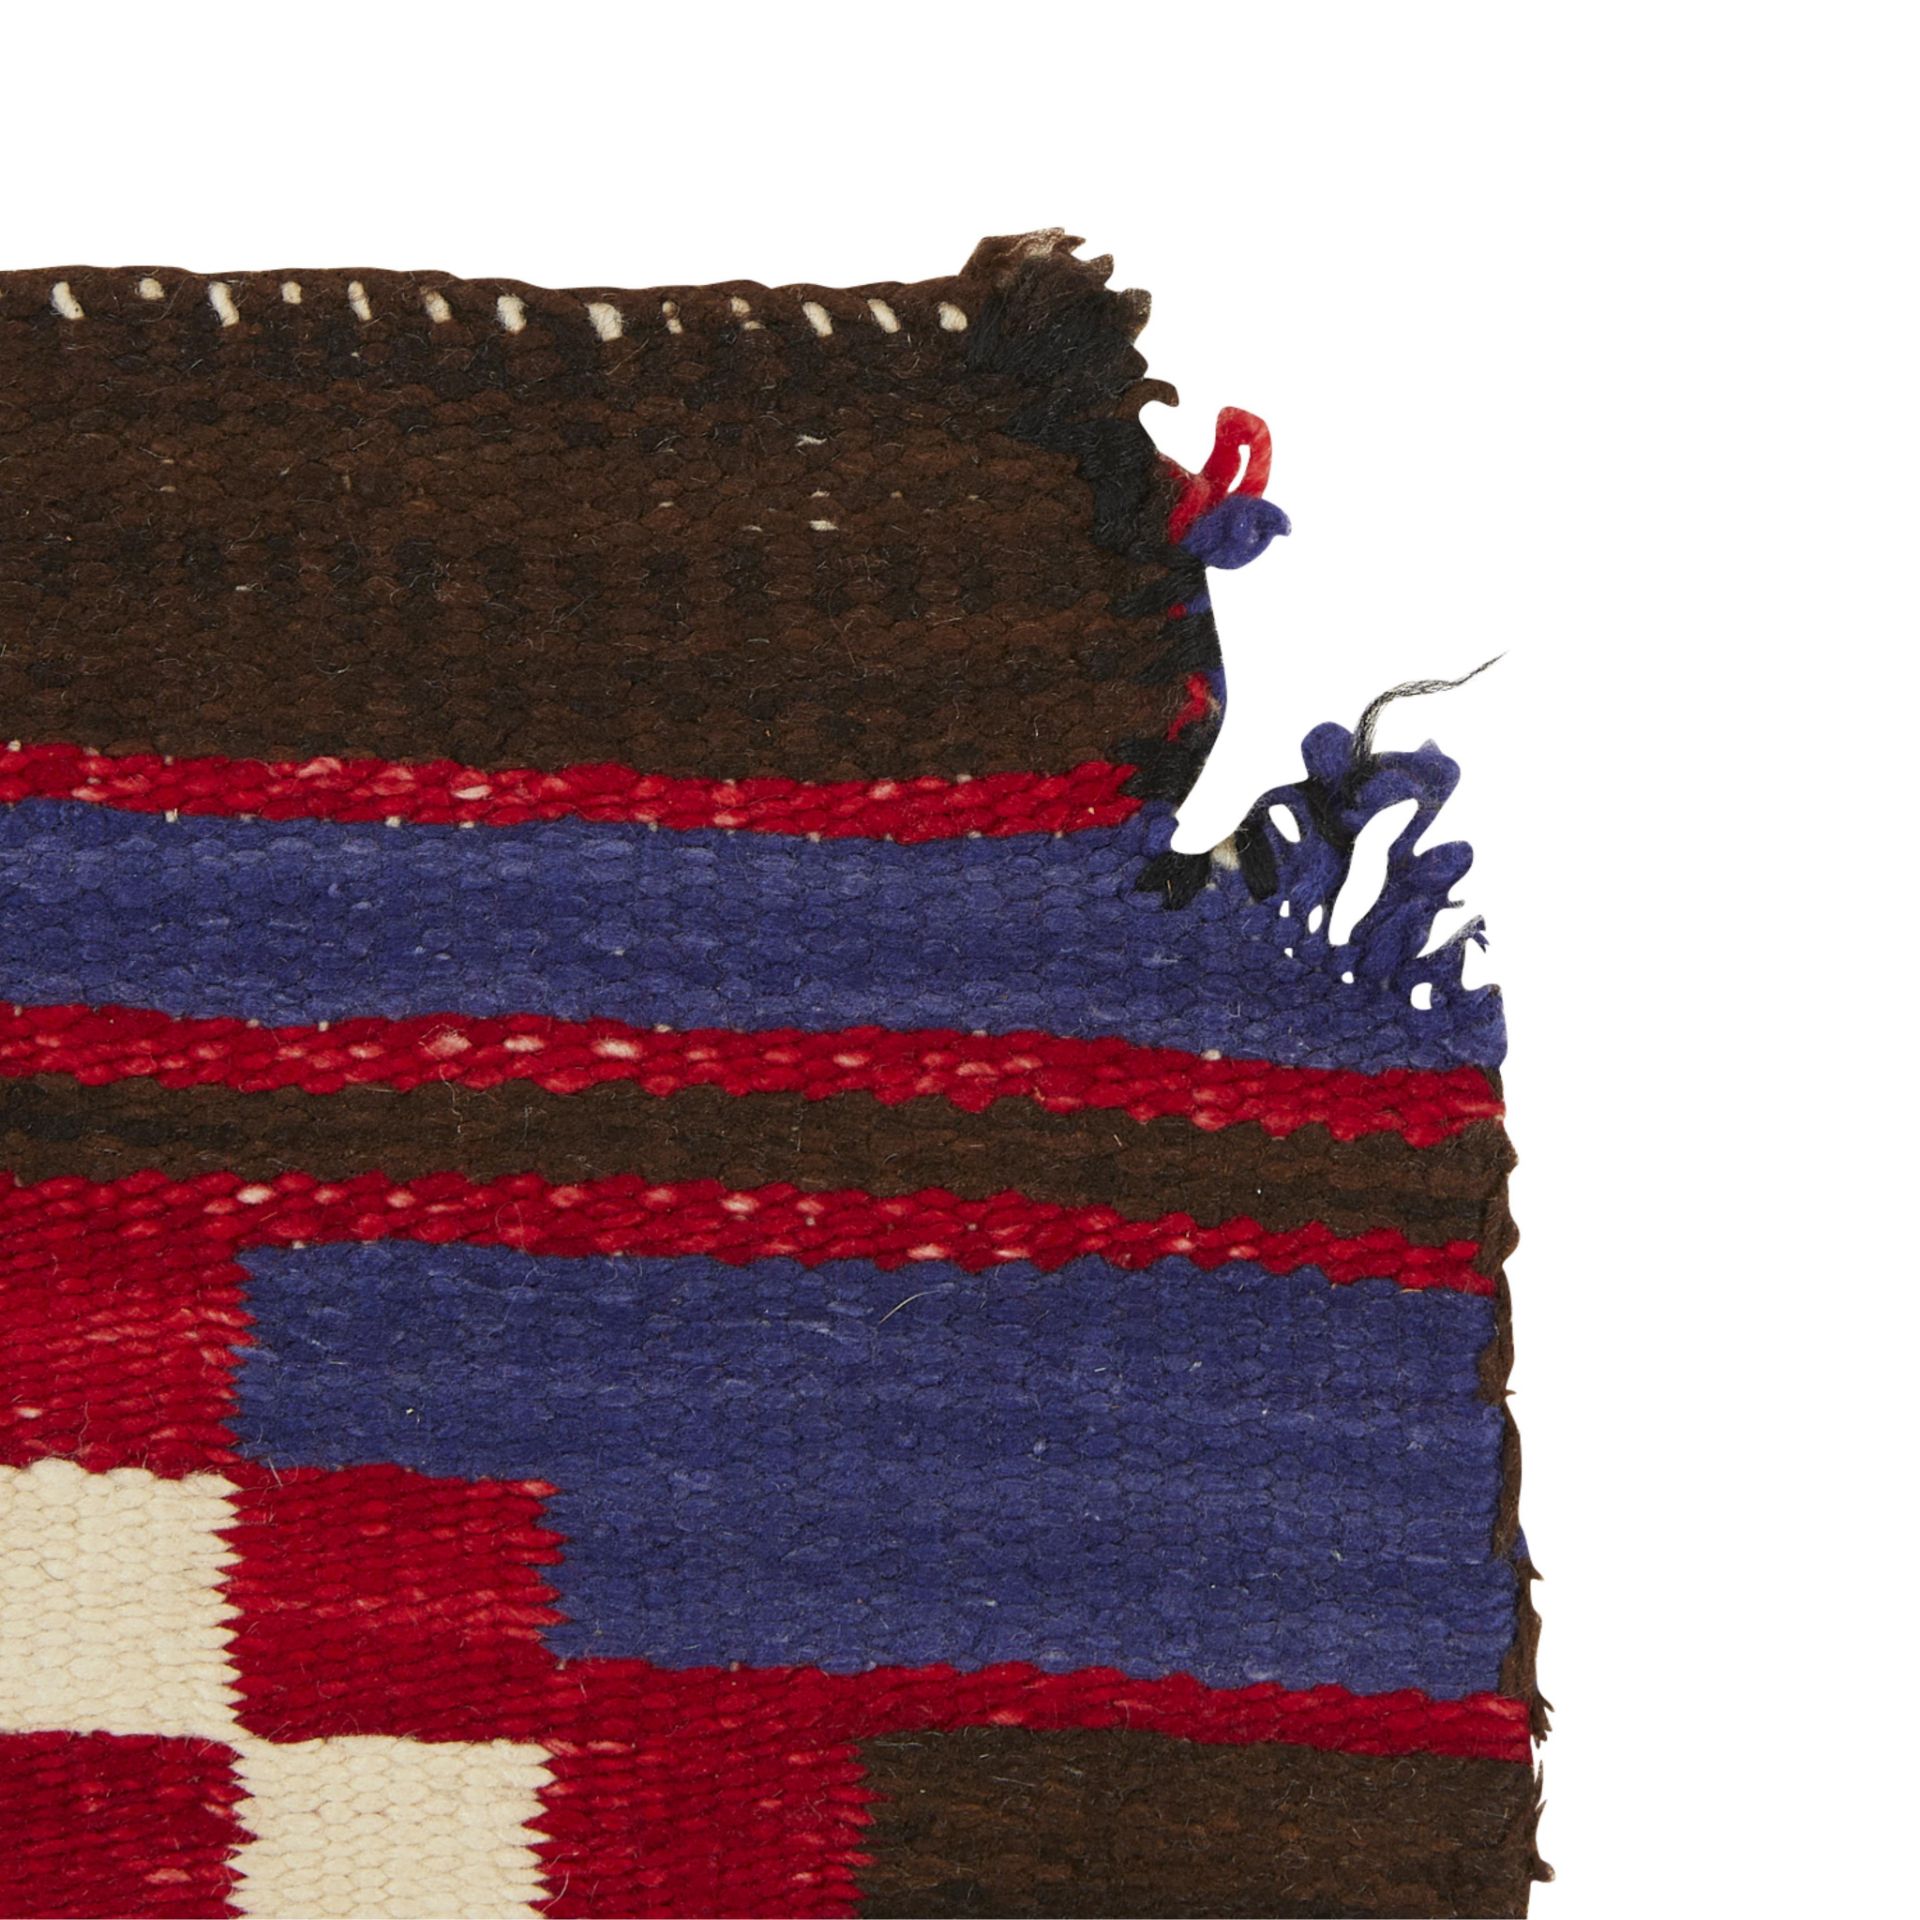 20th c. Navajo Chief's Revival Blanket 6' x 4' - Image 5 of 10